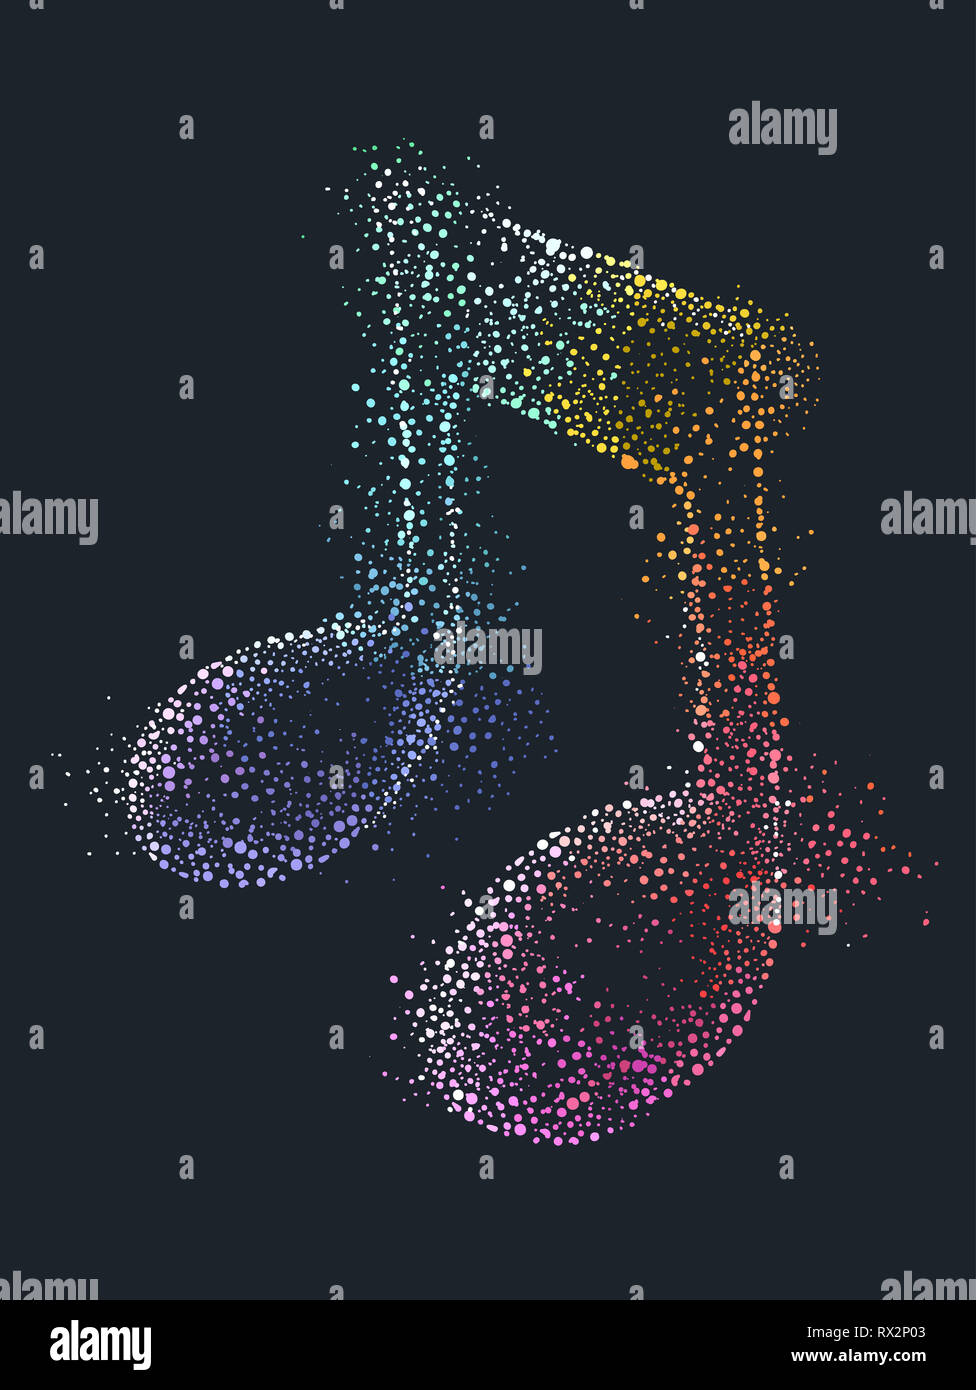 Illustration Of A Musical Note In Rainbow Colors And Pointillism